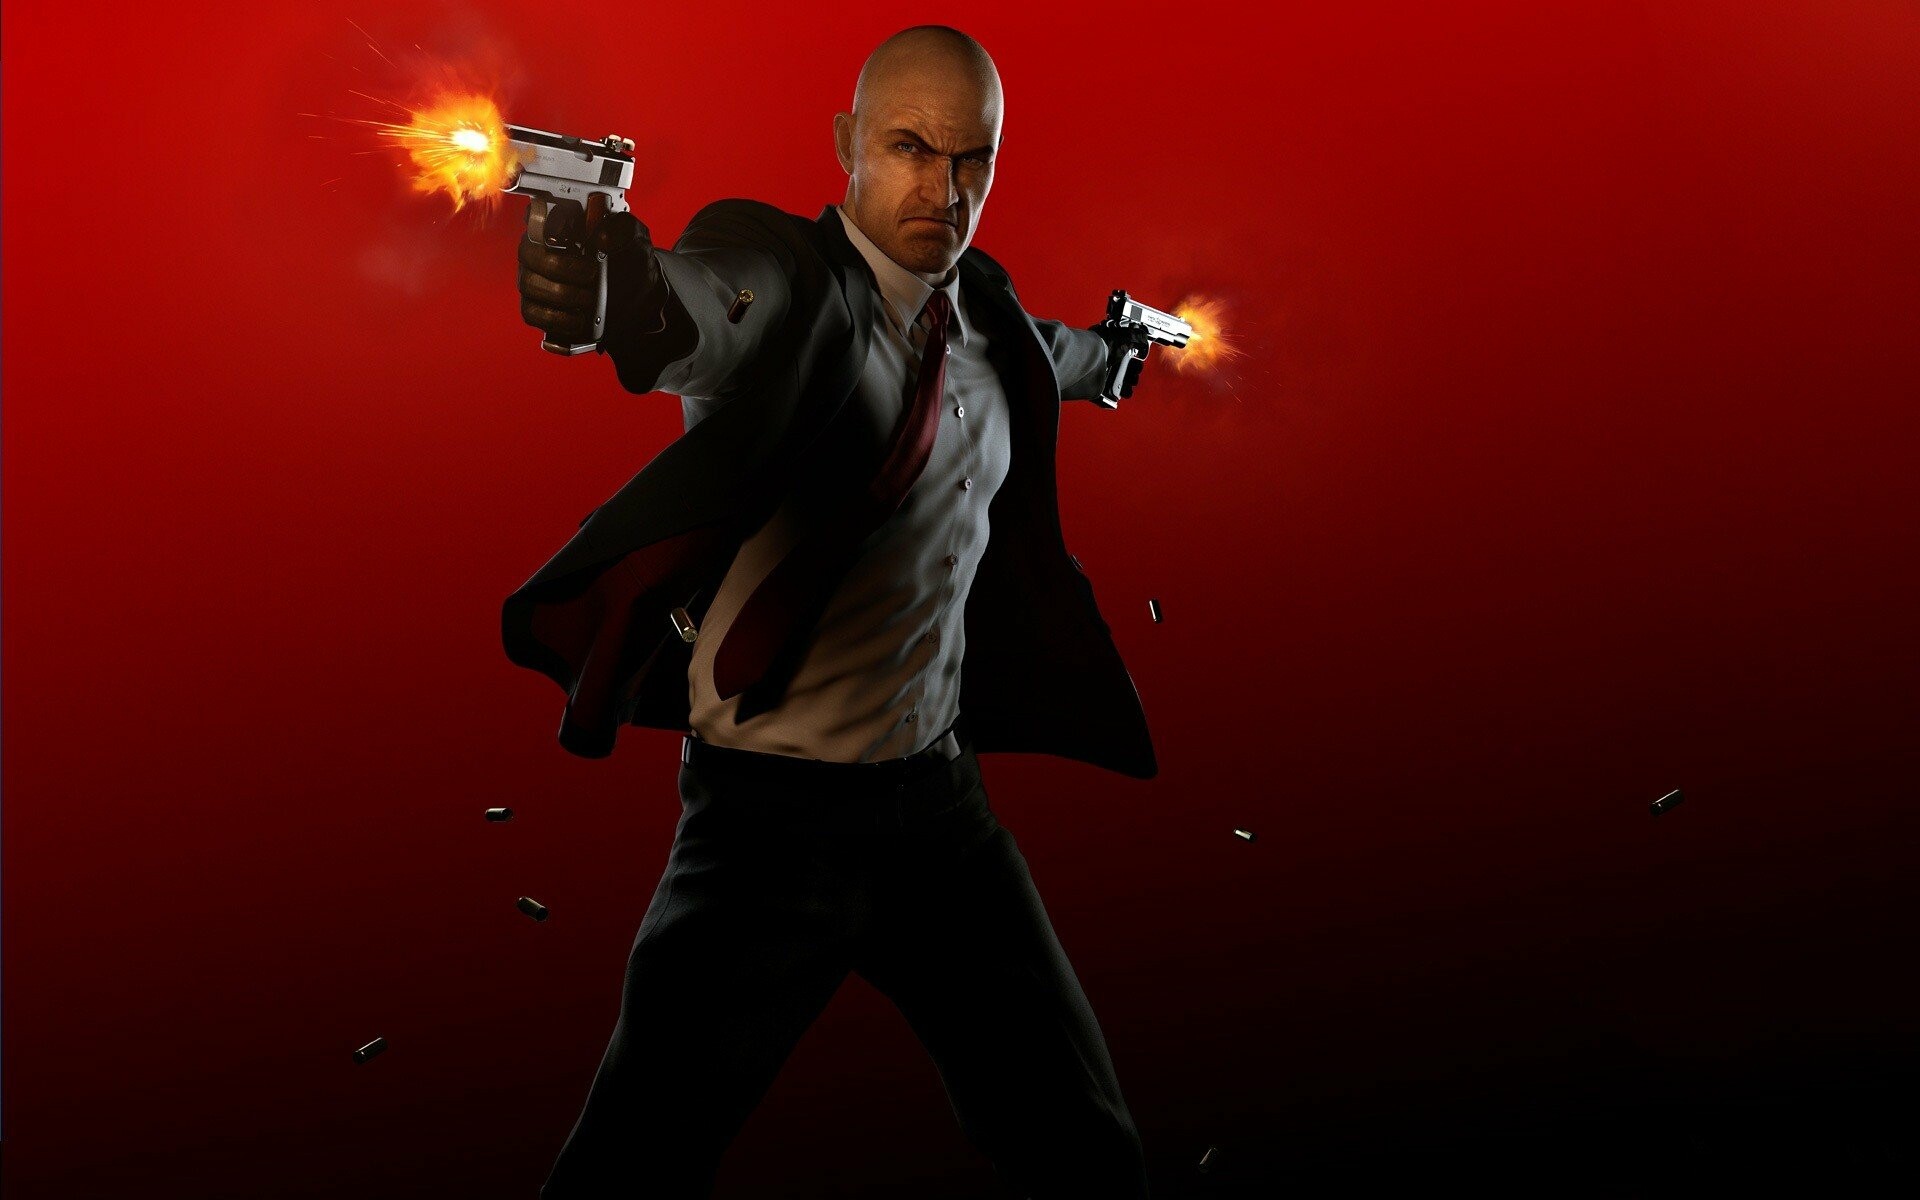 Hitman (Game): Absolution's story follows Agent 47's efforts to protect a genetically-engineered teenage girl from various criminal syndicates. 1920x1200 HD Background.